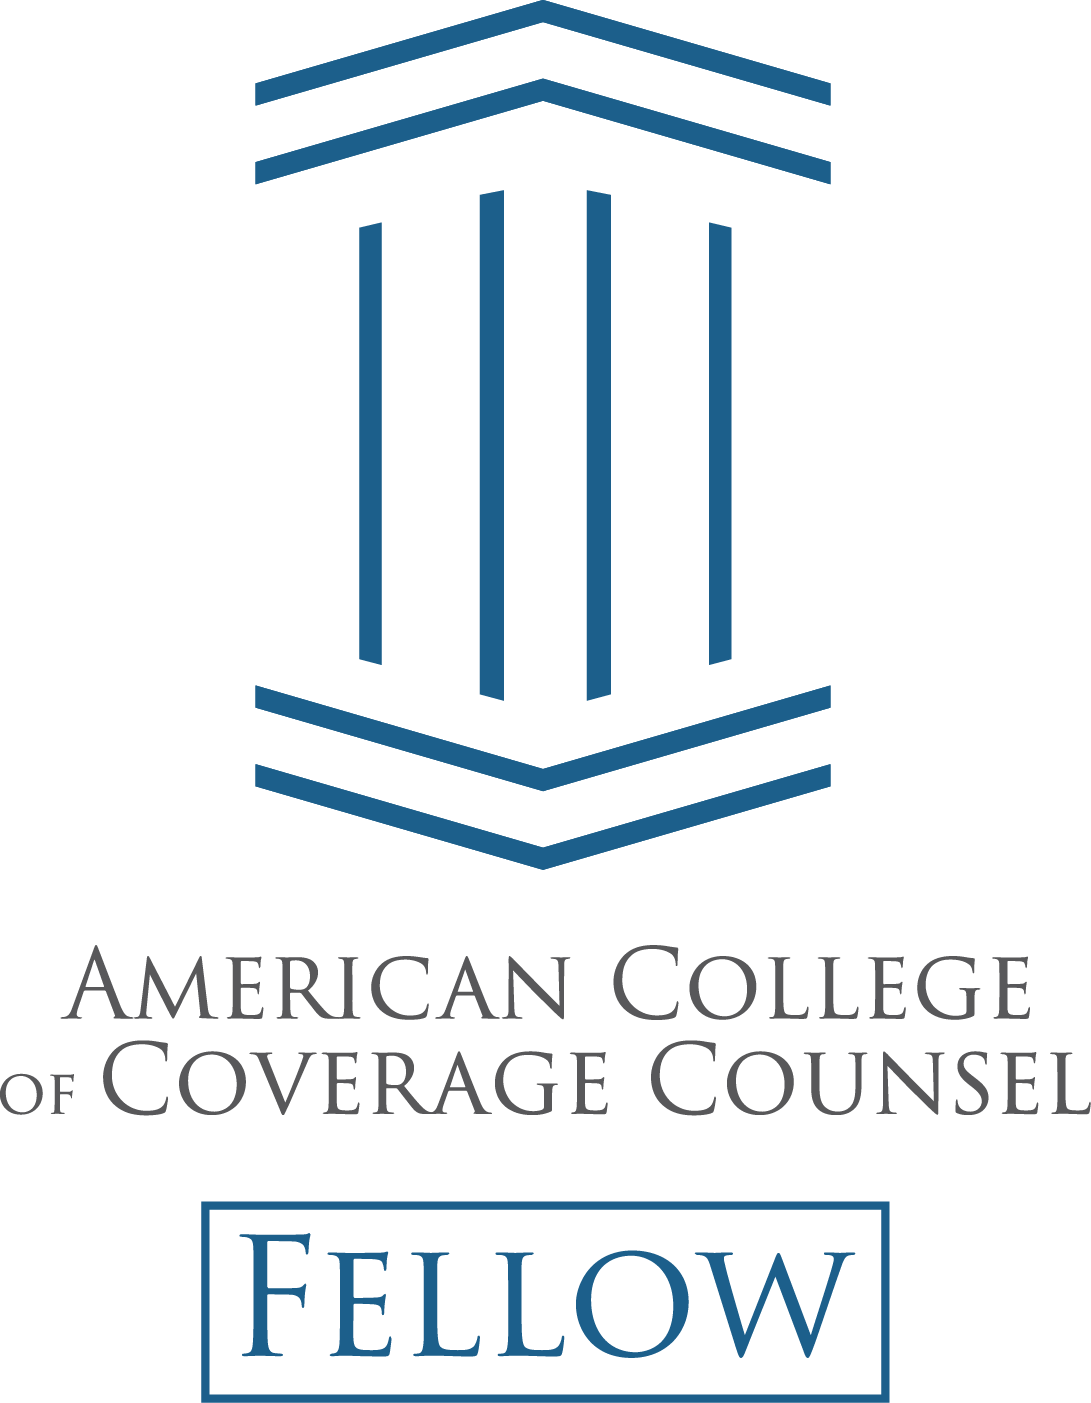 American College of Coverage Counsel